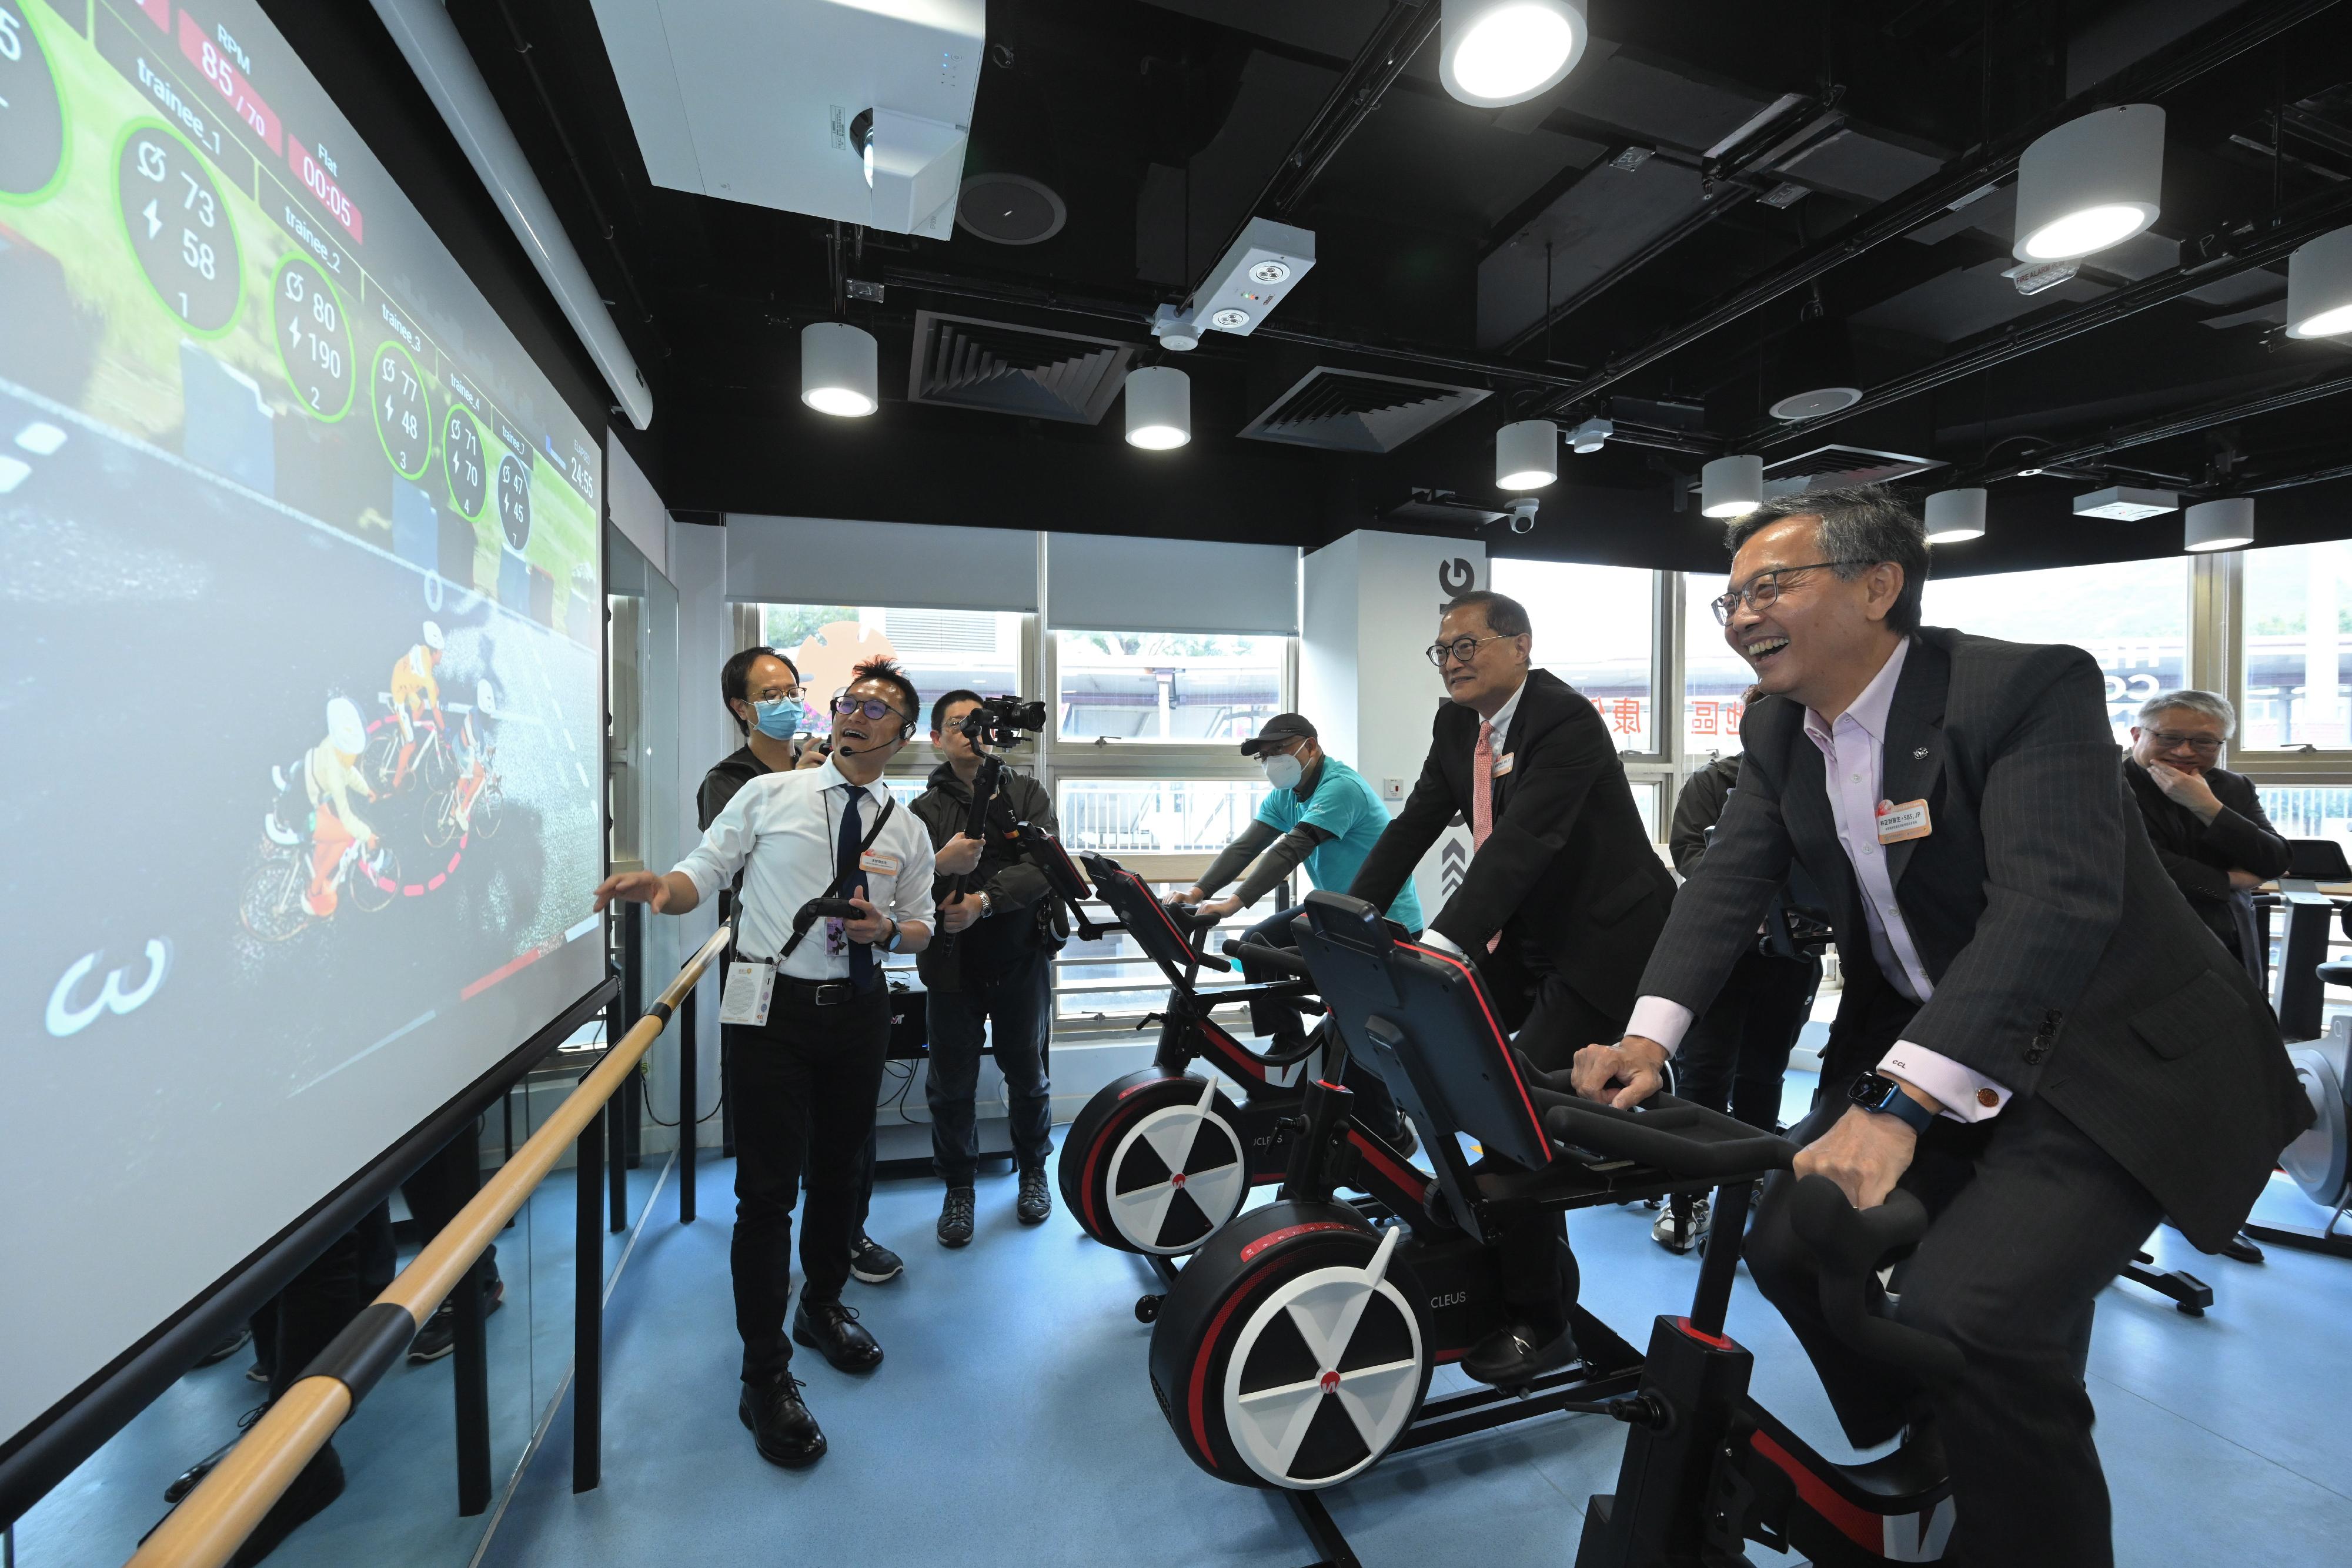 The Secretary for Health, Professor Lo Chung-mau, attended the opening ceremony of the Tuen Mun District Health Centre today (March 13). Photo shows Professor Lo (second right) and Convenor of the Steering Committee on Primary Healthcare Development Dr Lam Ching-choi (first right), riding on exercise bikes.